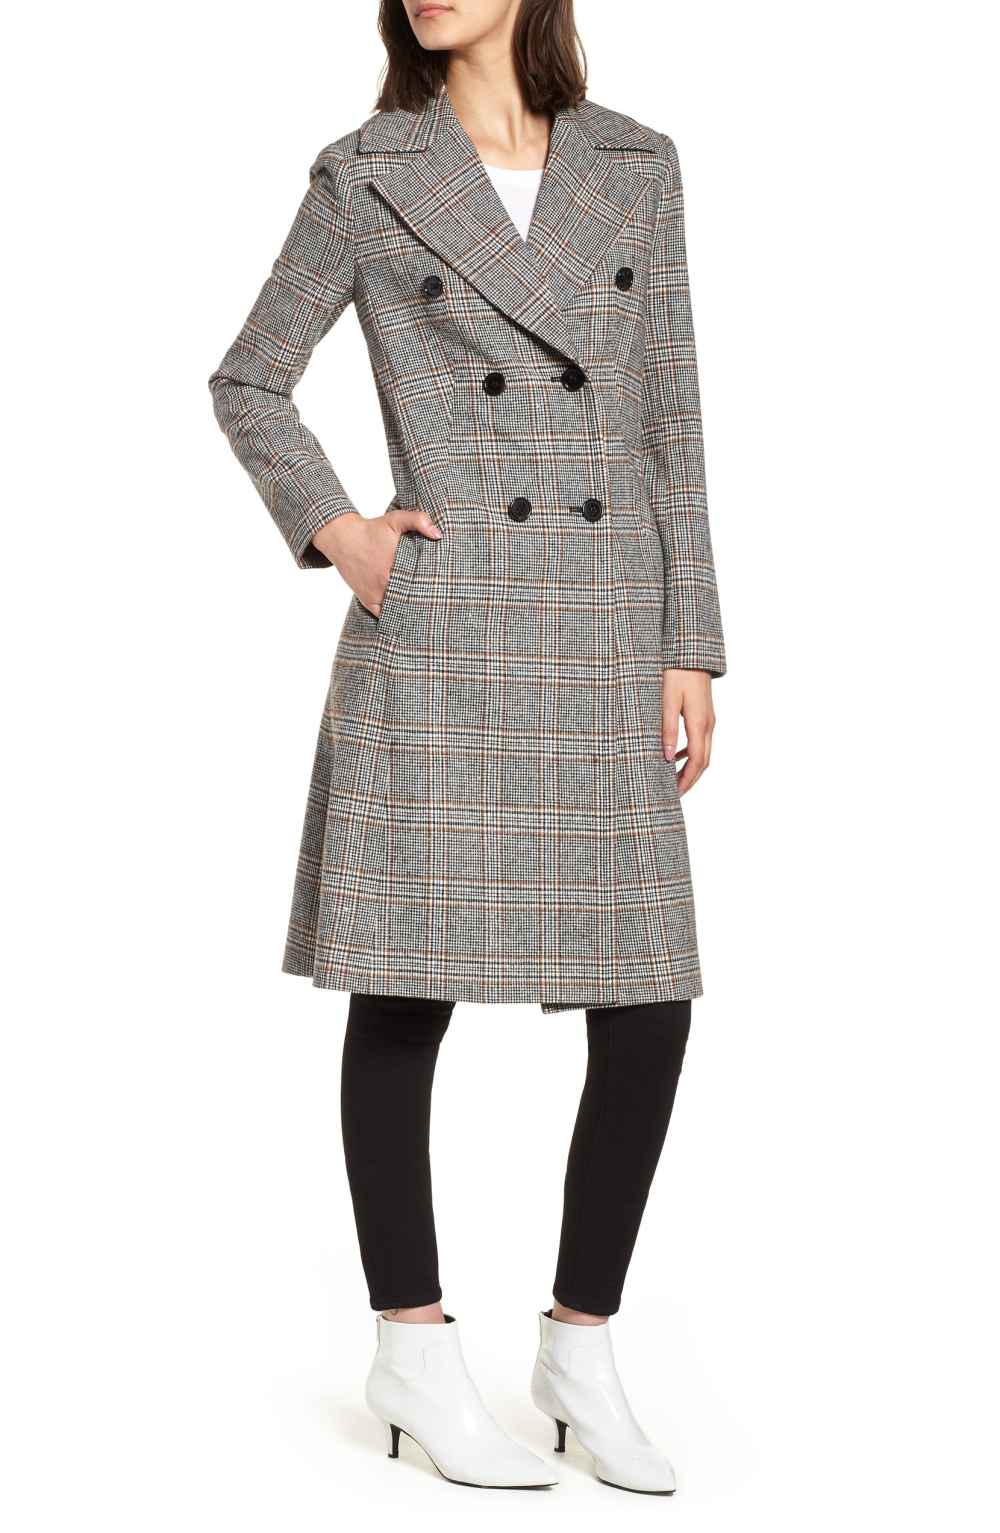 Complete Your Fall Looks With This Plaid Blazer Coat | UsWeekly